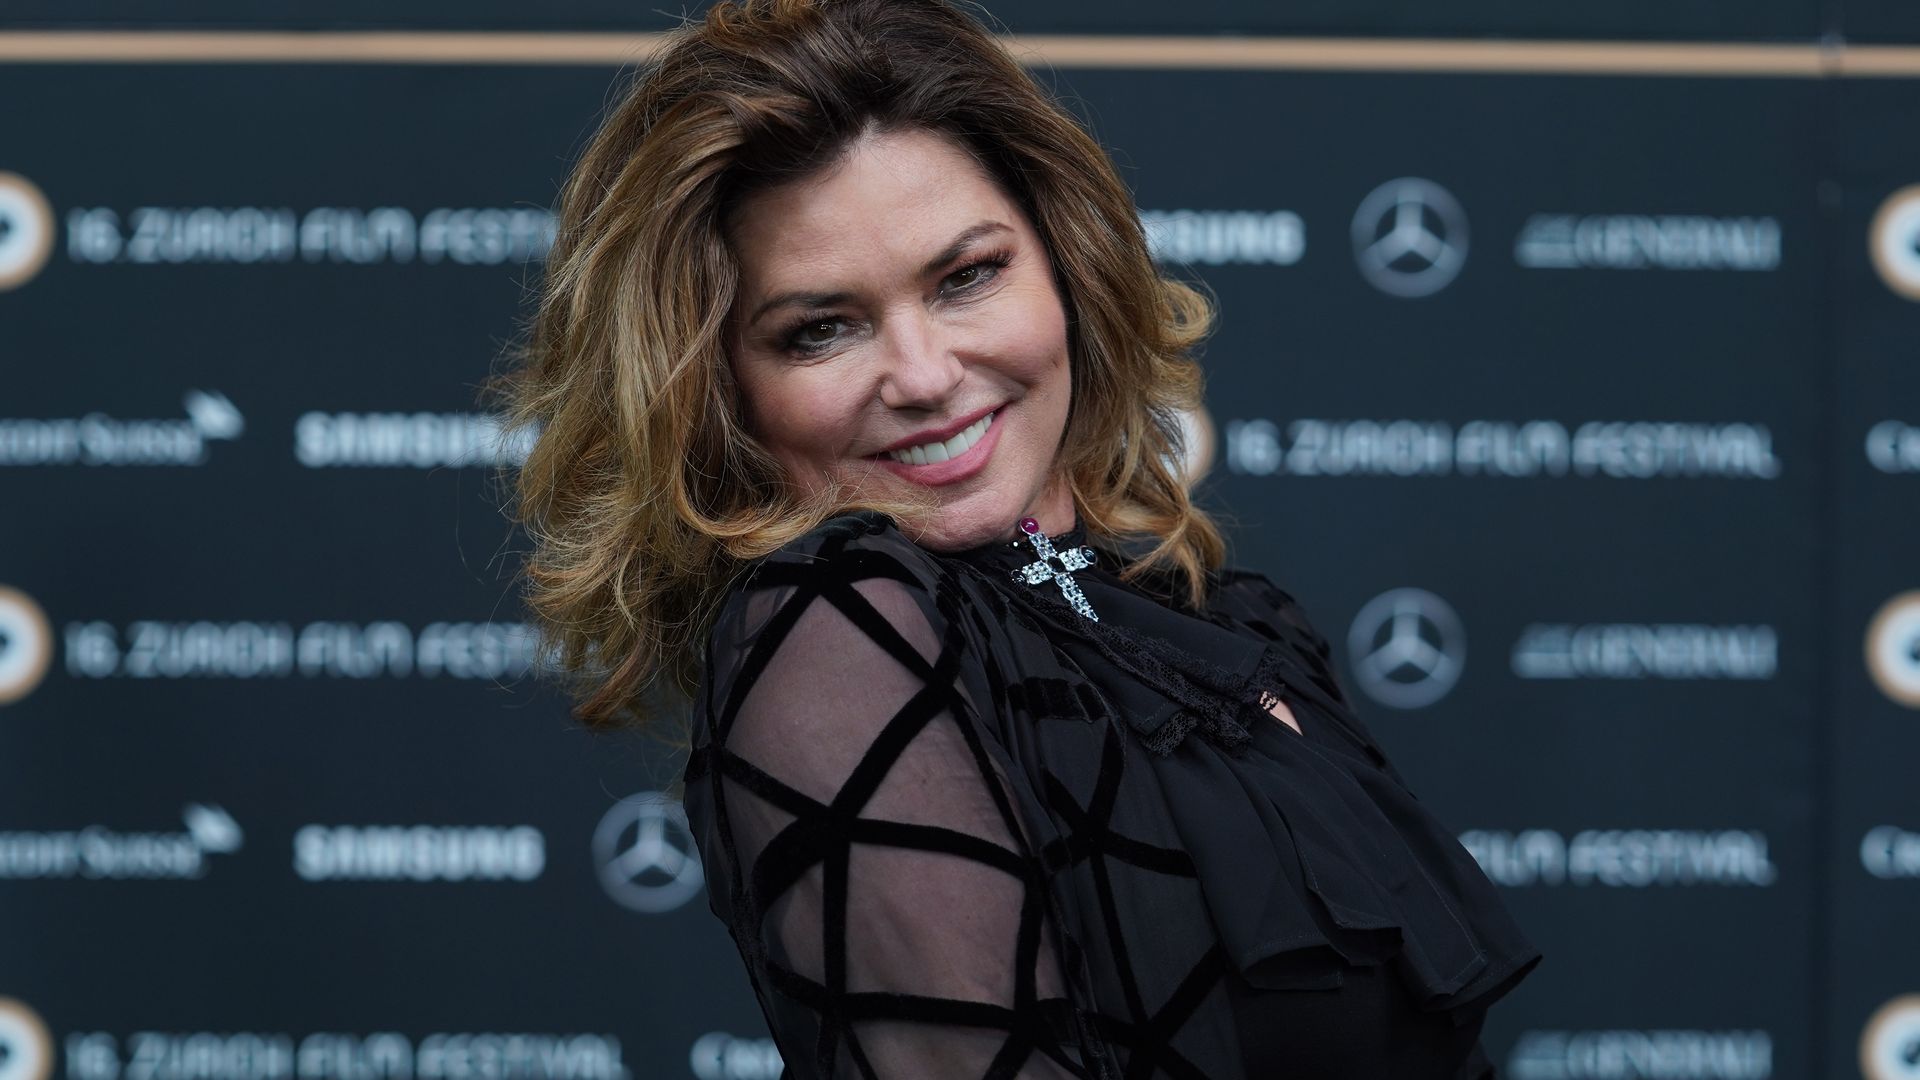 Shania Twain's surprising demand on tour due to her fear — 'It's one of the most depressing things about life right now'